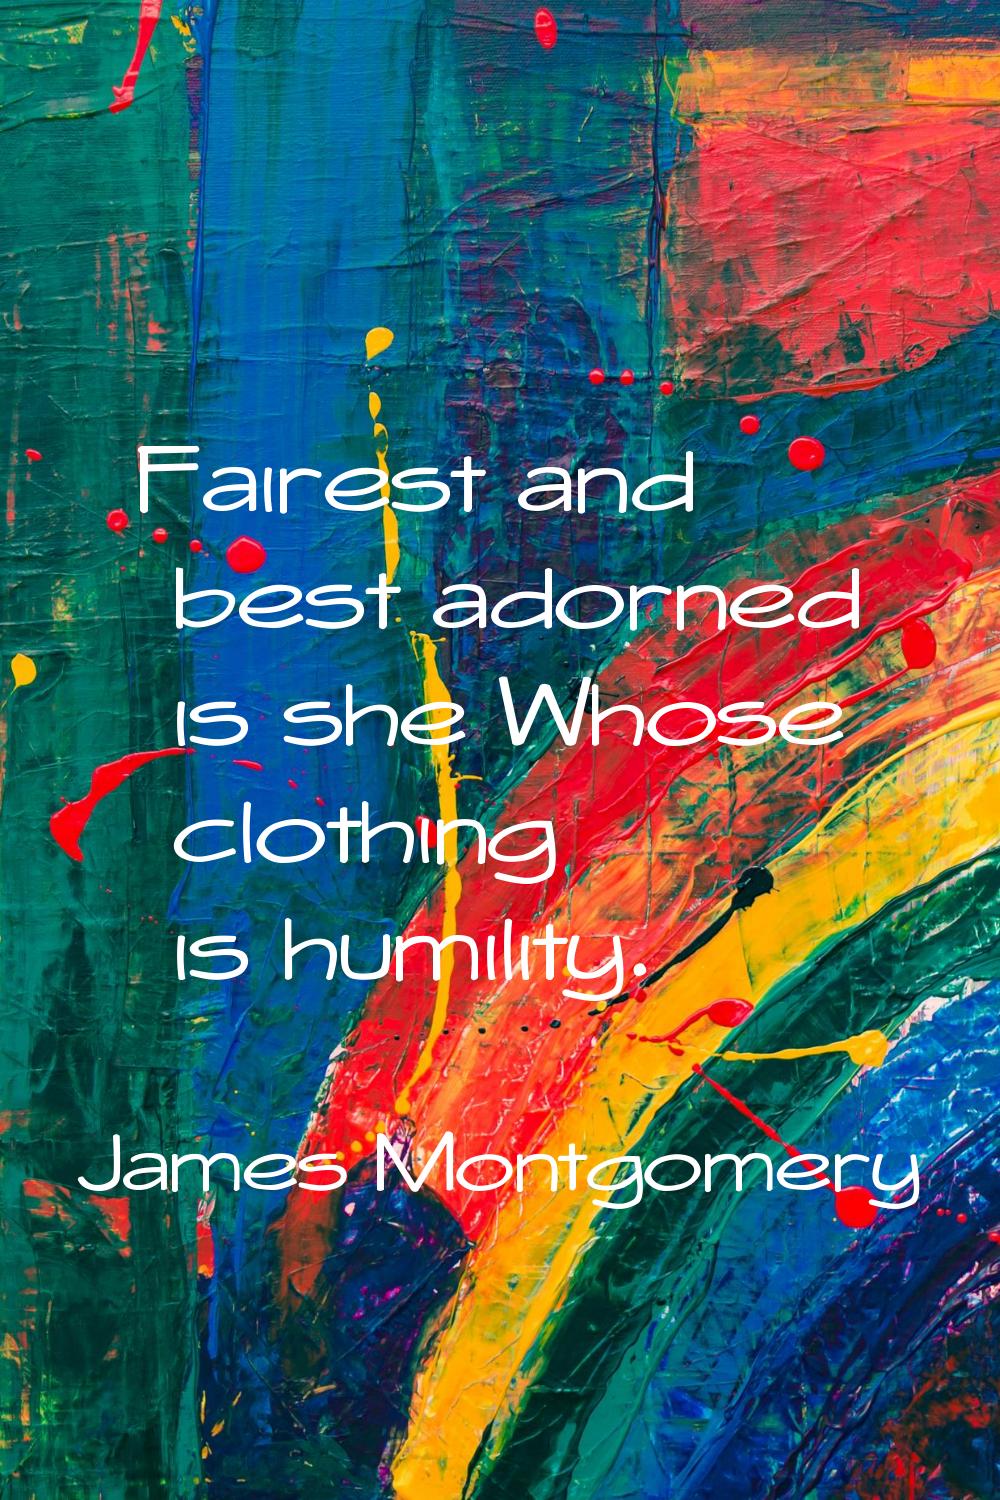 Fairest and best adorned is she Whose clothing is humility.